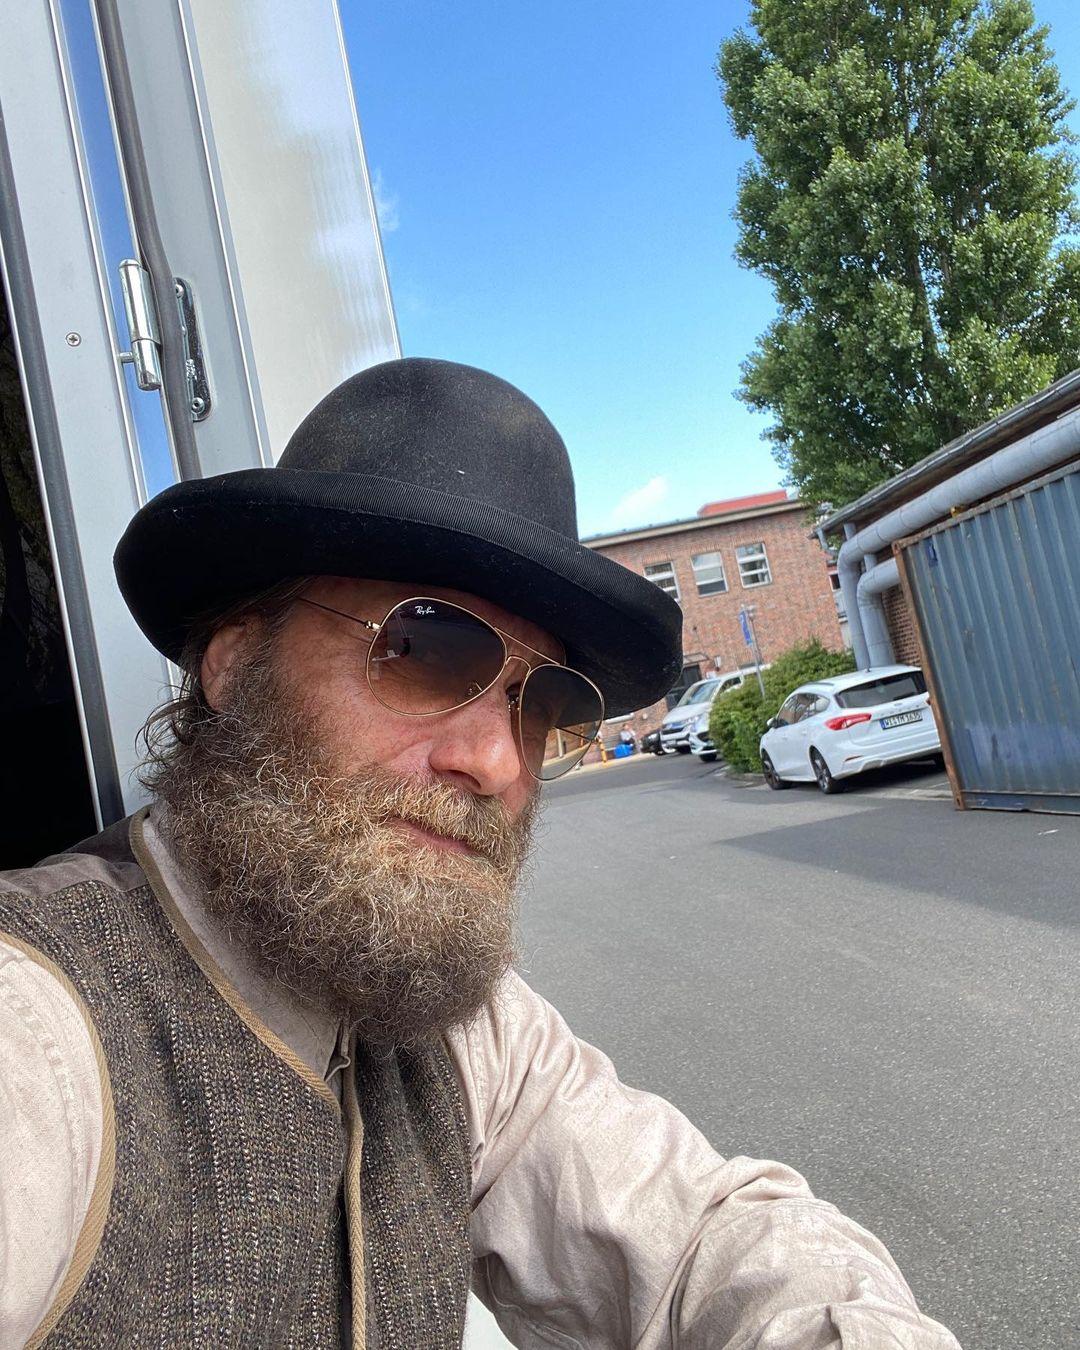 class="content__text"
 Anker is in his Trailer and staying in there for Christmas🎄…. Marry Christmas and hope you fully enjoyed the Show🙏🏼😎 @netflix1899@netflixde ? #actor #life #love @_jag_london@teamplayersagency #follow 
 